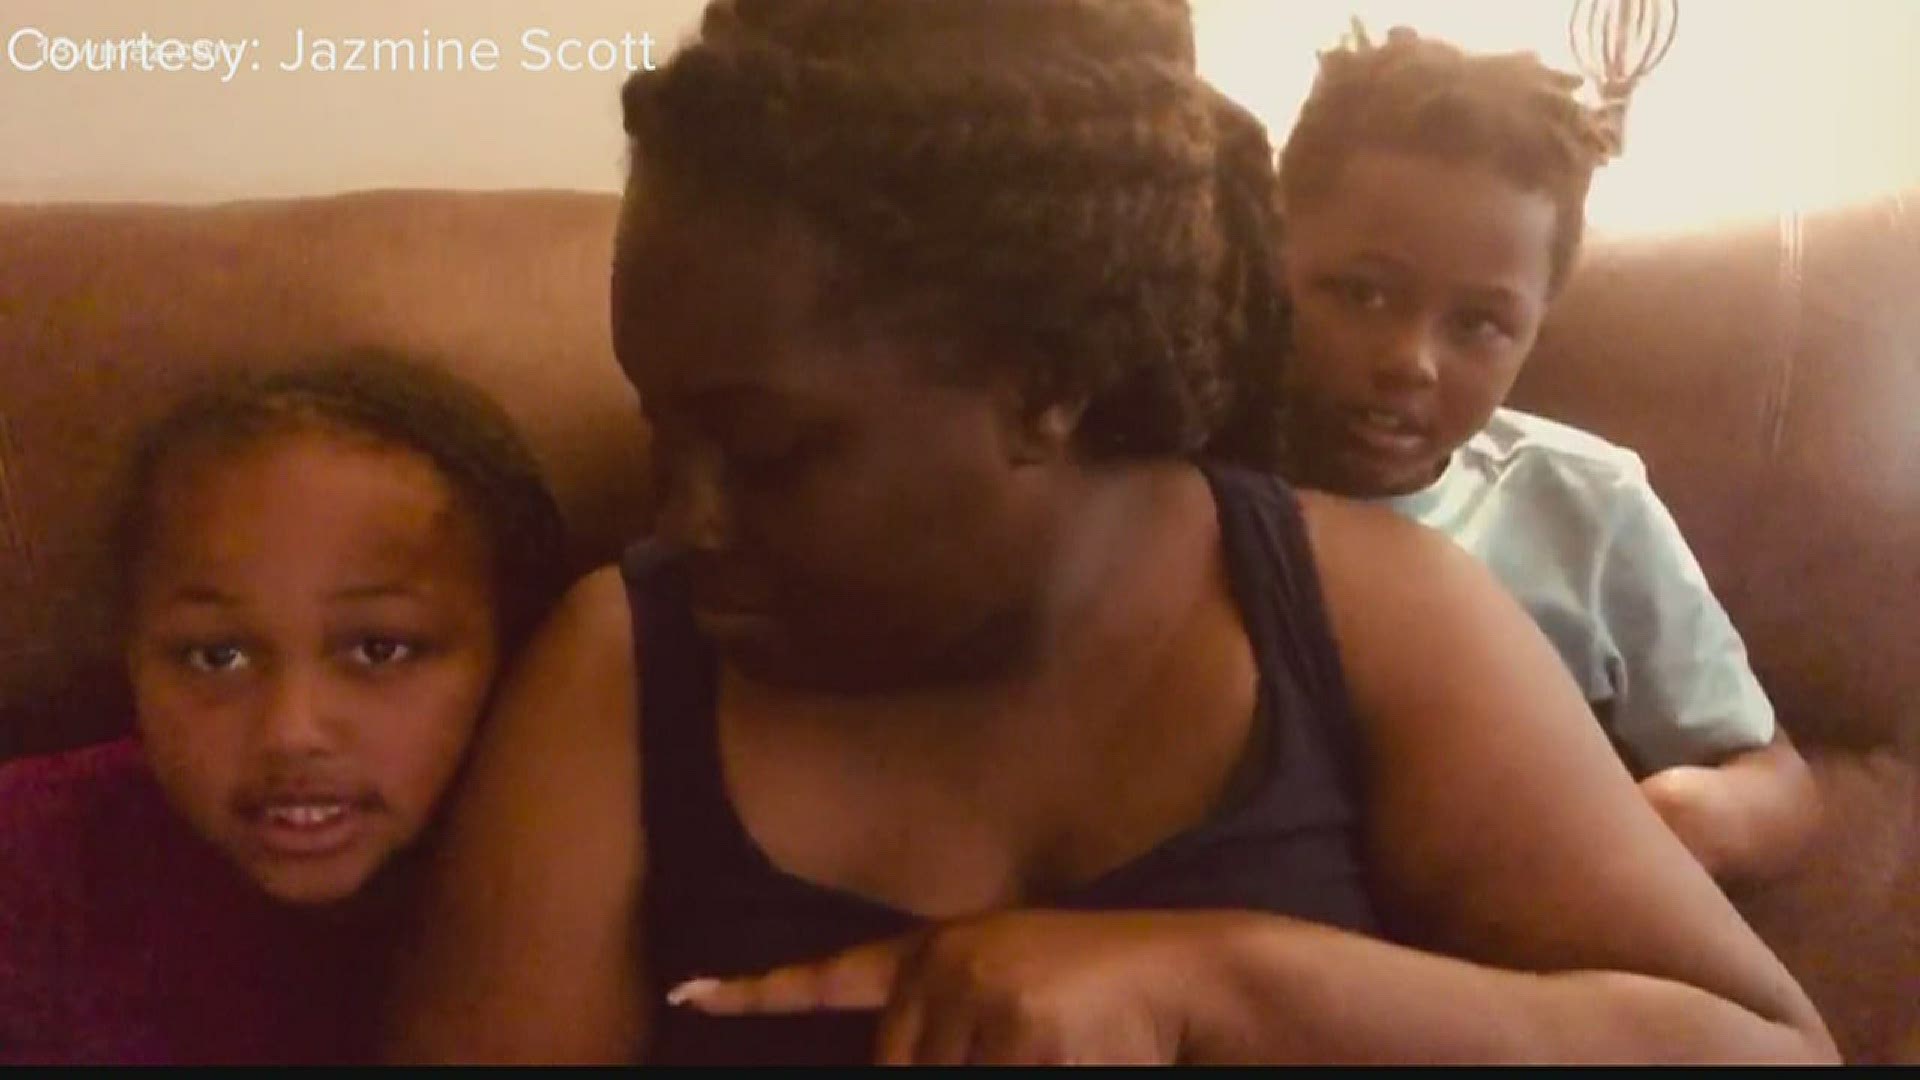 Warner Robins mom Jazmine Scott took her two children to a peaceful protest, and says they left emotional and asking questions about why the protests were happening